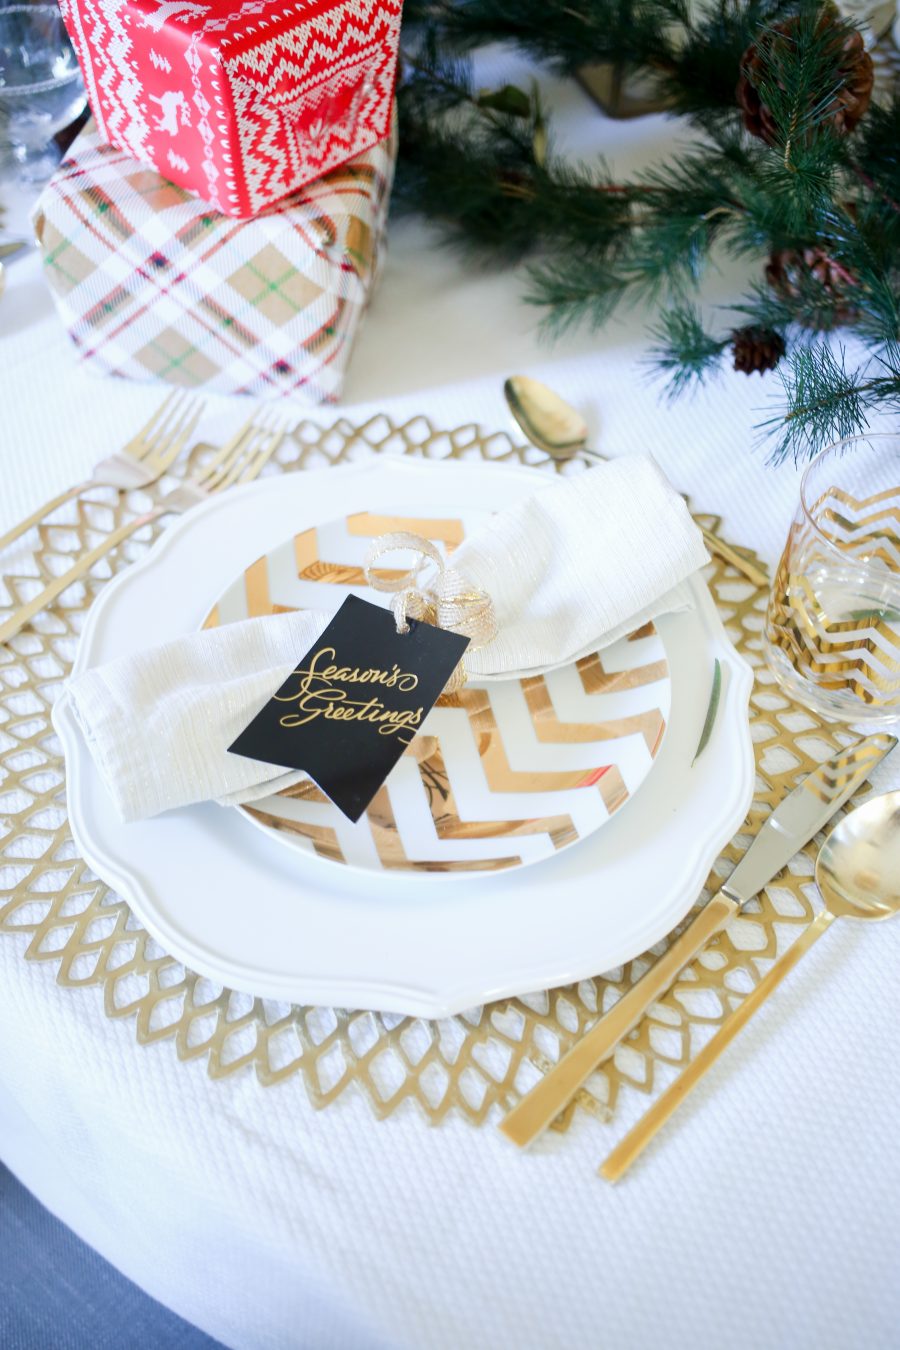 3 Tablesetting Ideas for your Christmas Table - use gift card hangtags to tie your napkin - by Fashionable Hostess4